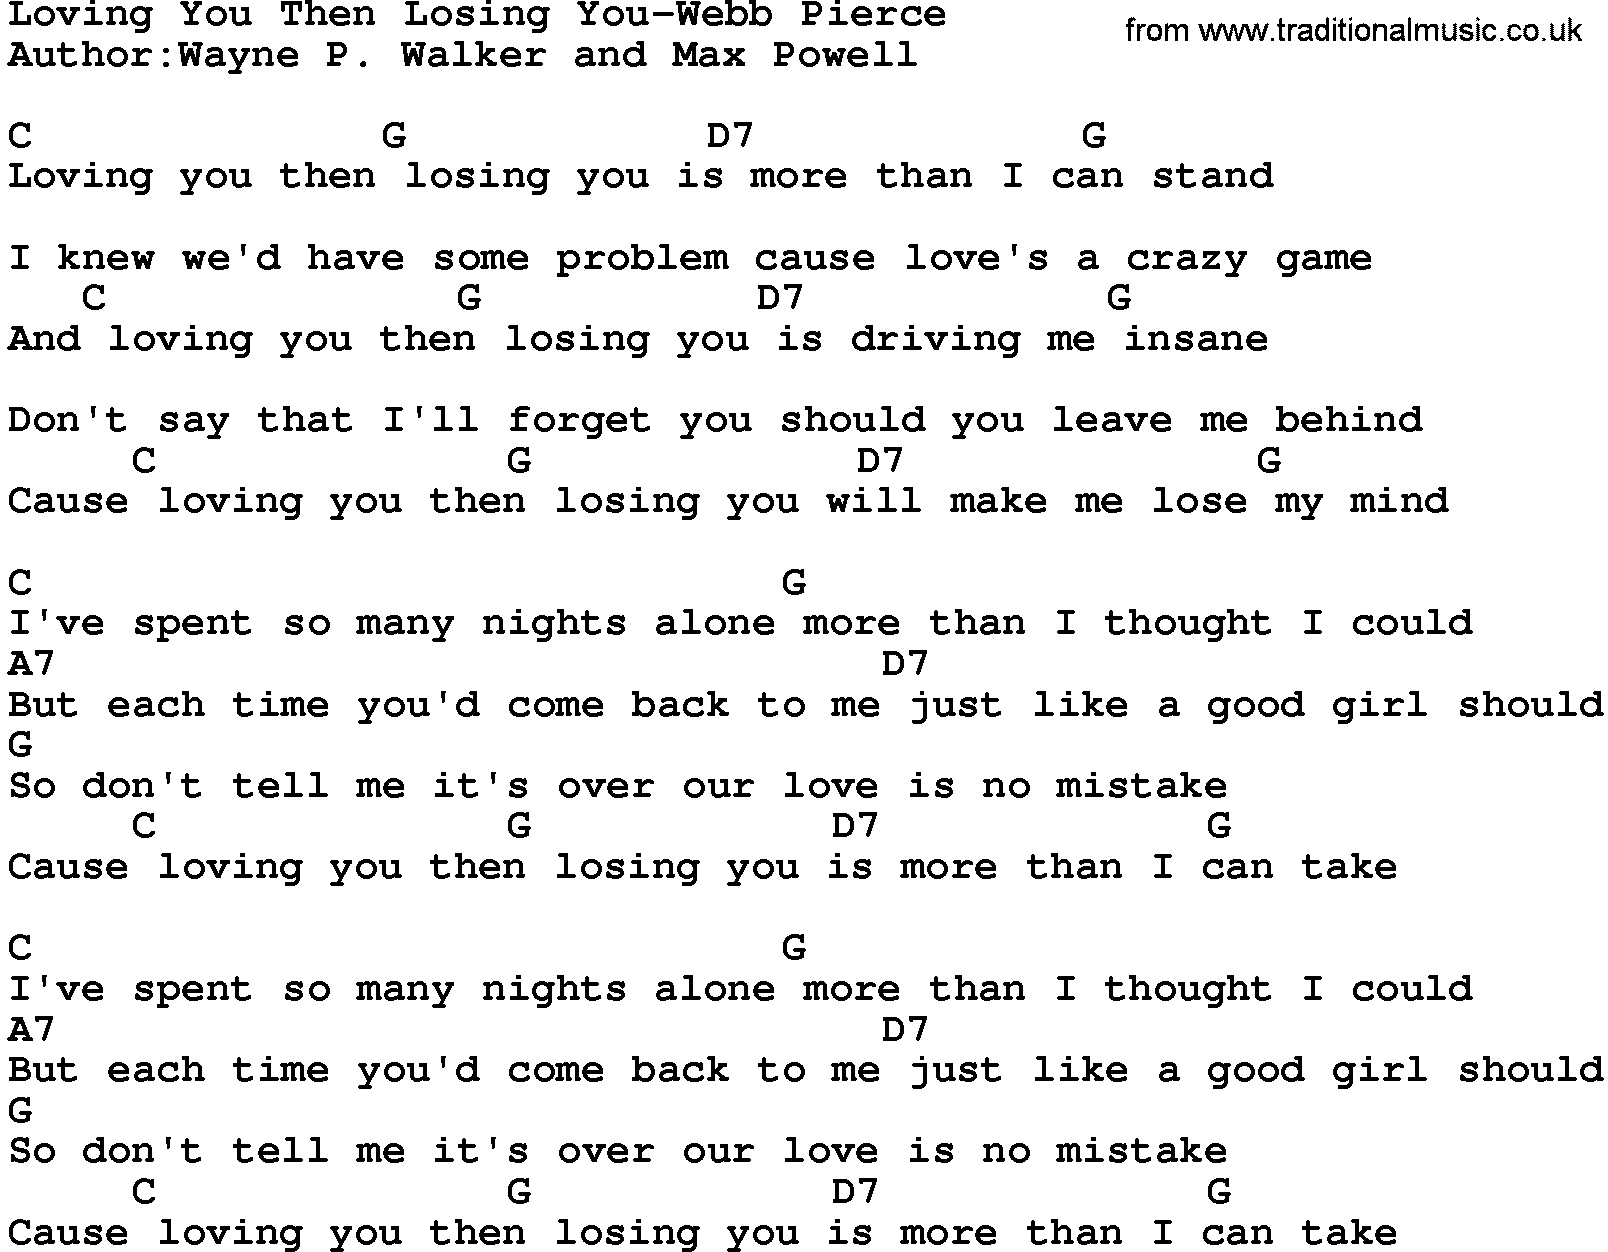 Country music song: Loving You Then Losing You-Webb Pierce lyrics and chords